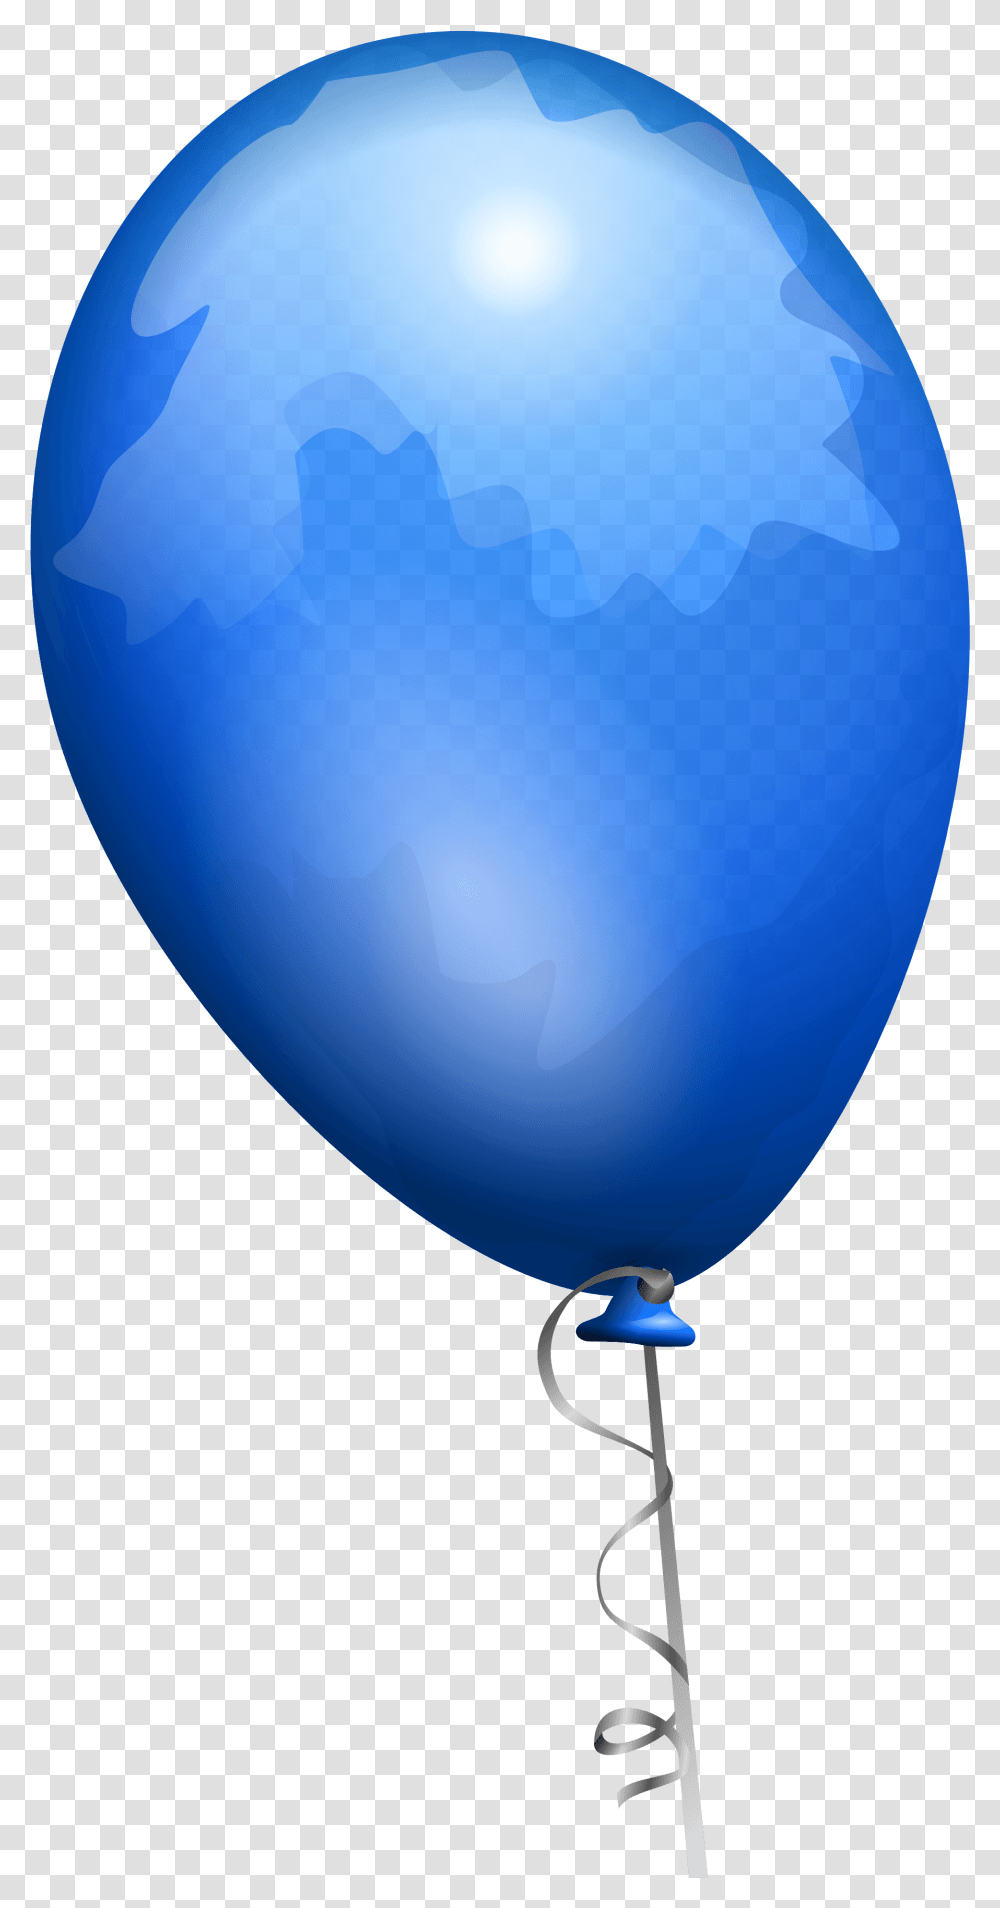 Download Red Balloon Image Download Hq Image Balloon Clip Art, Astronomy, Sphere, Outer Space, Universe Transparent Png